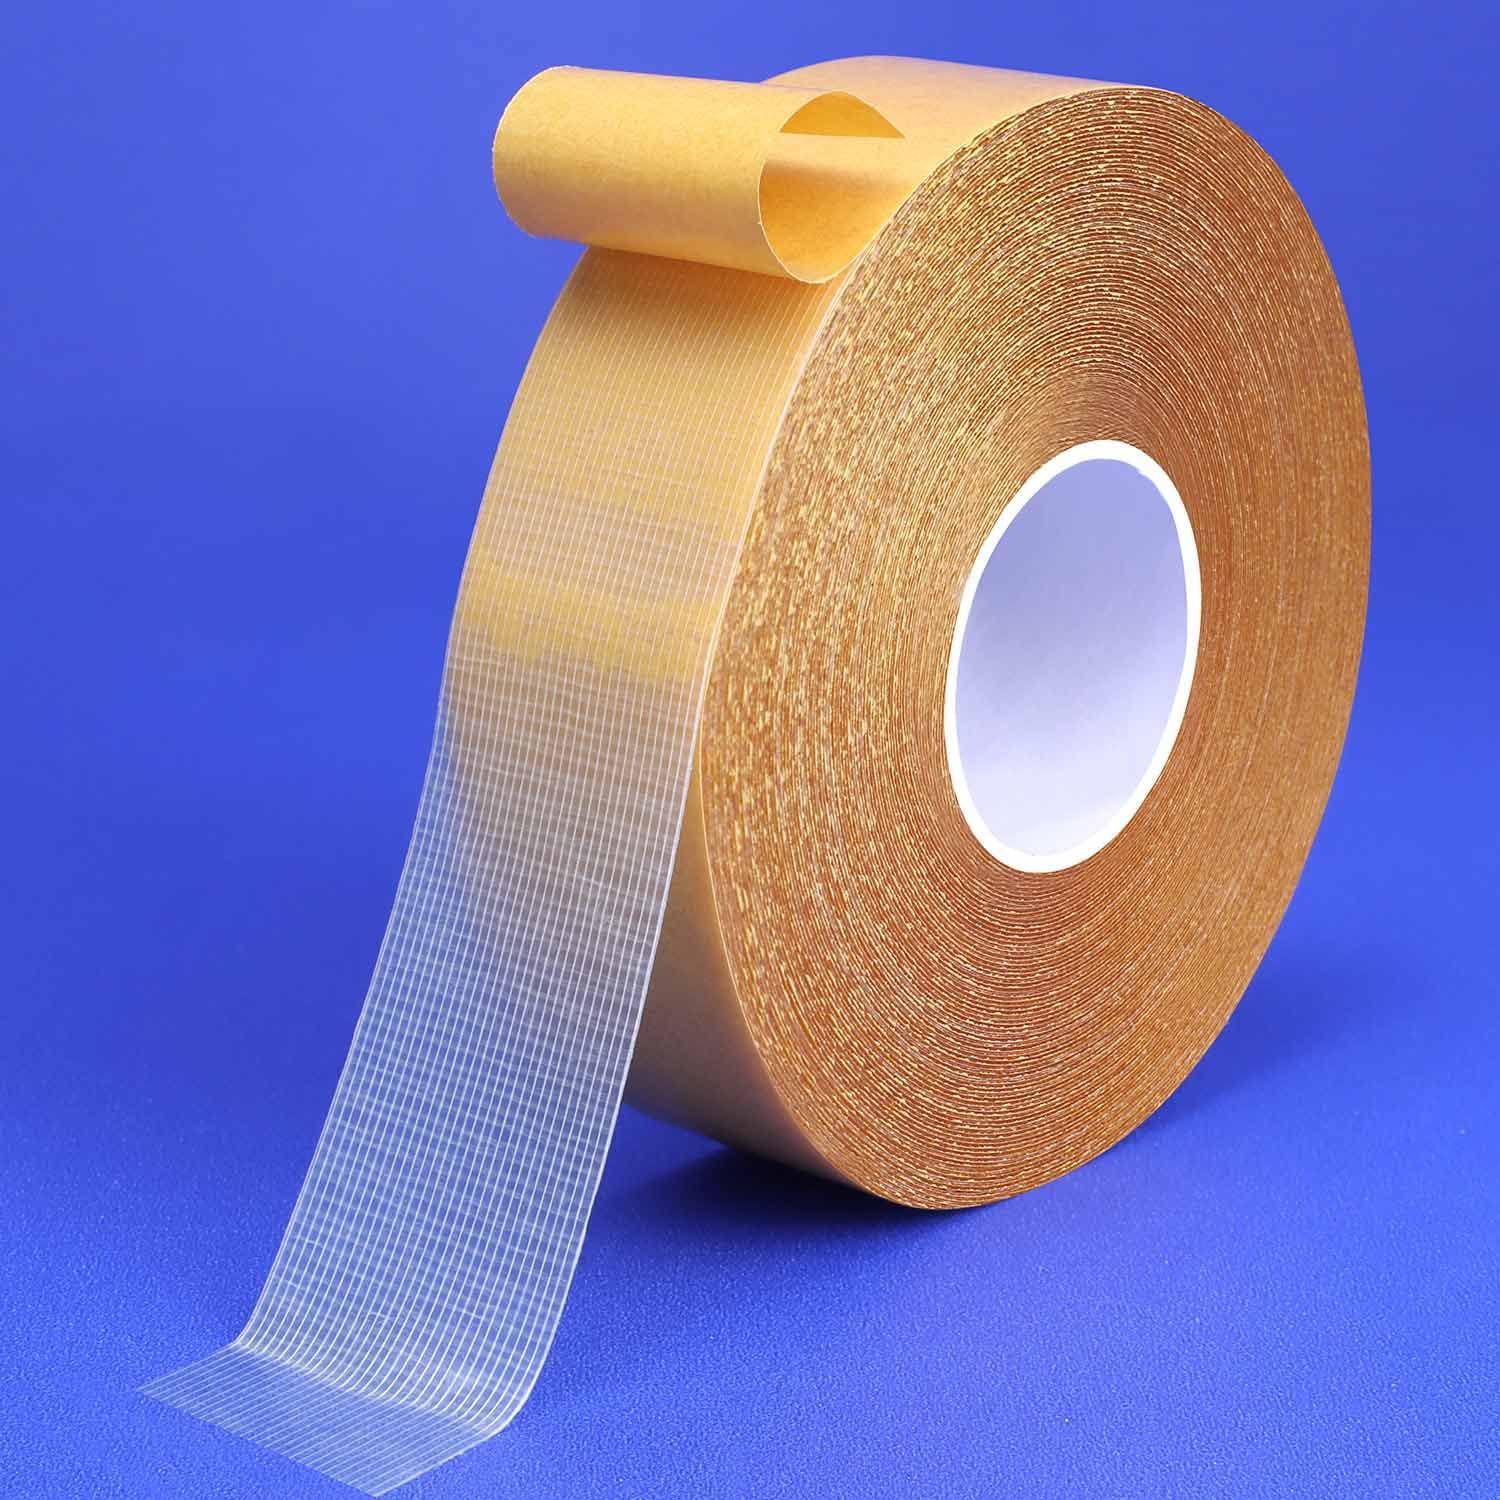 XFasten Double Sided Sticky Tape, Removable, 4-Inches x 20-Yards, Single  Roll